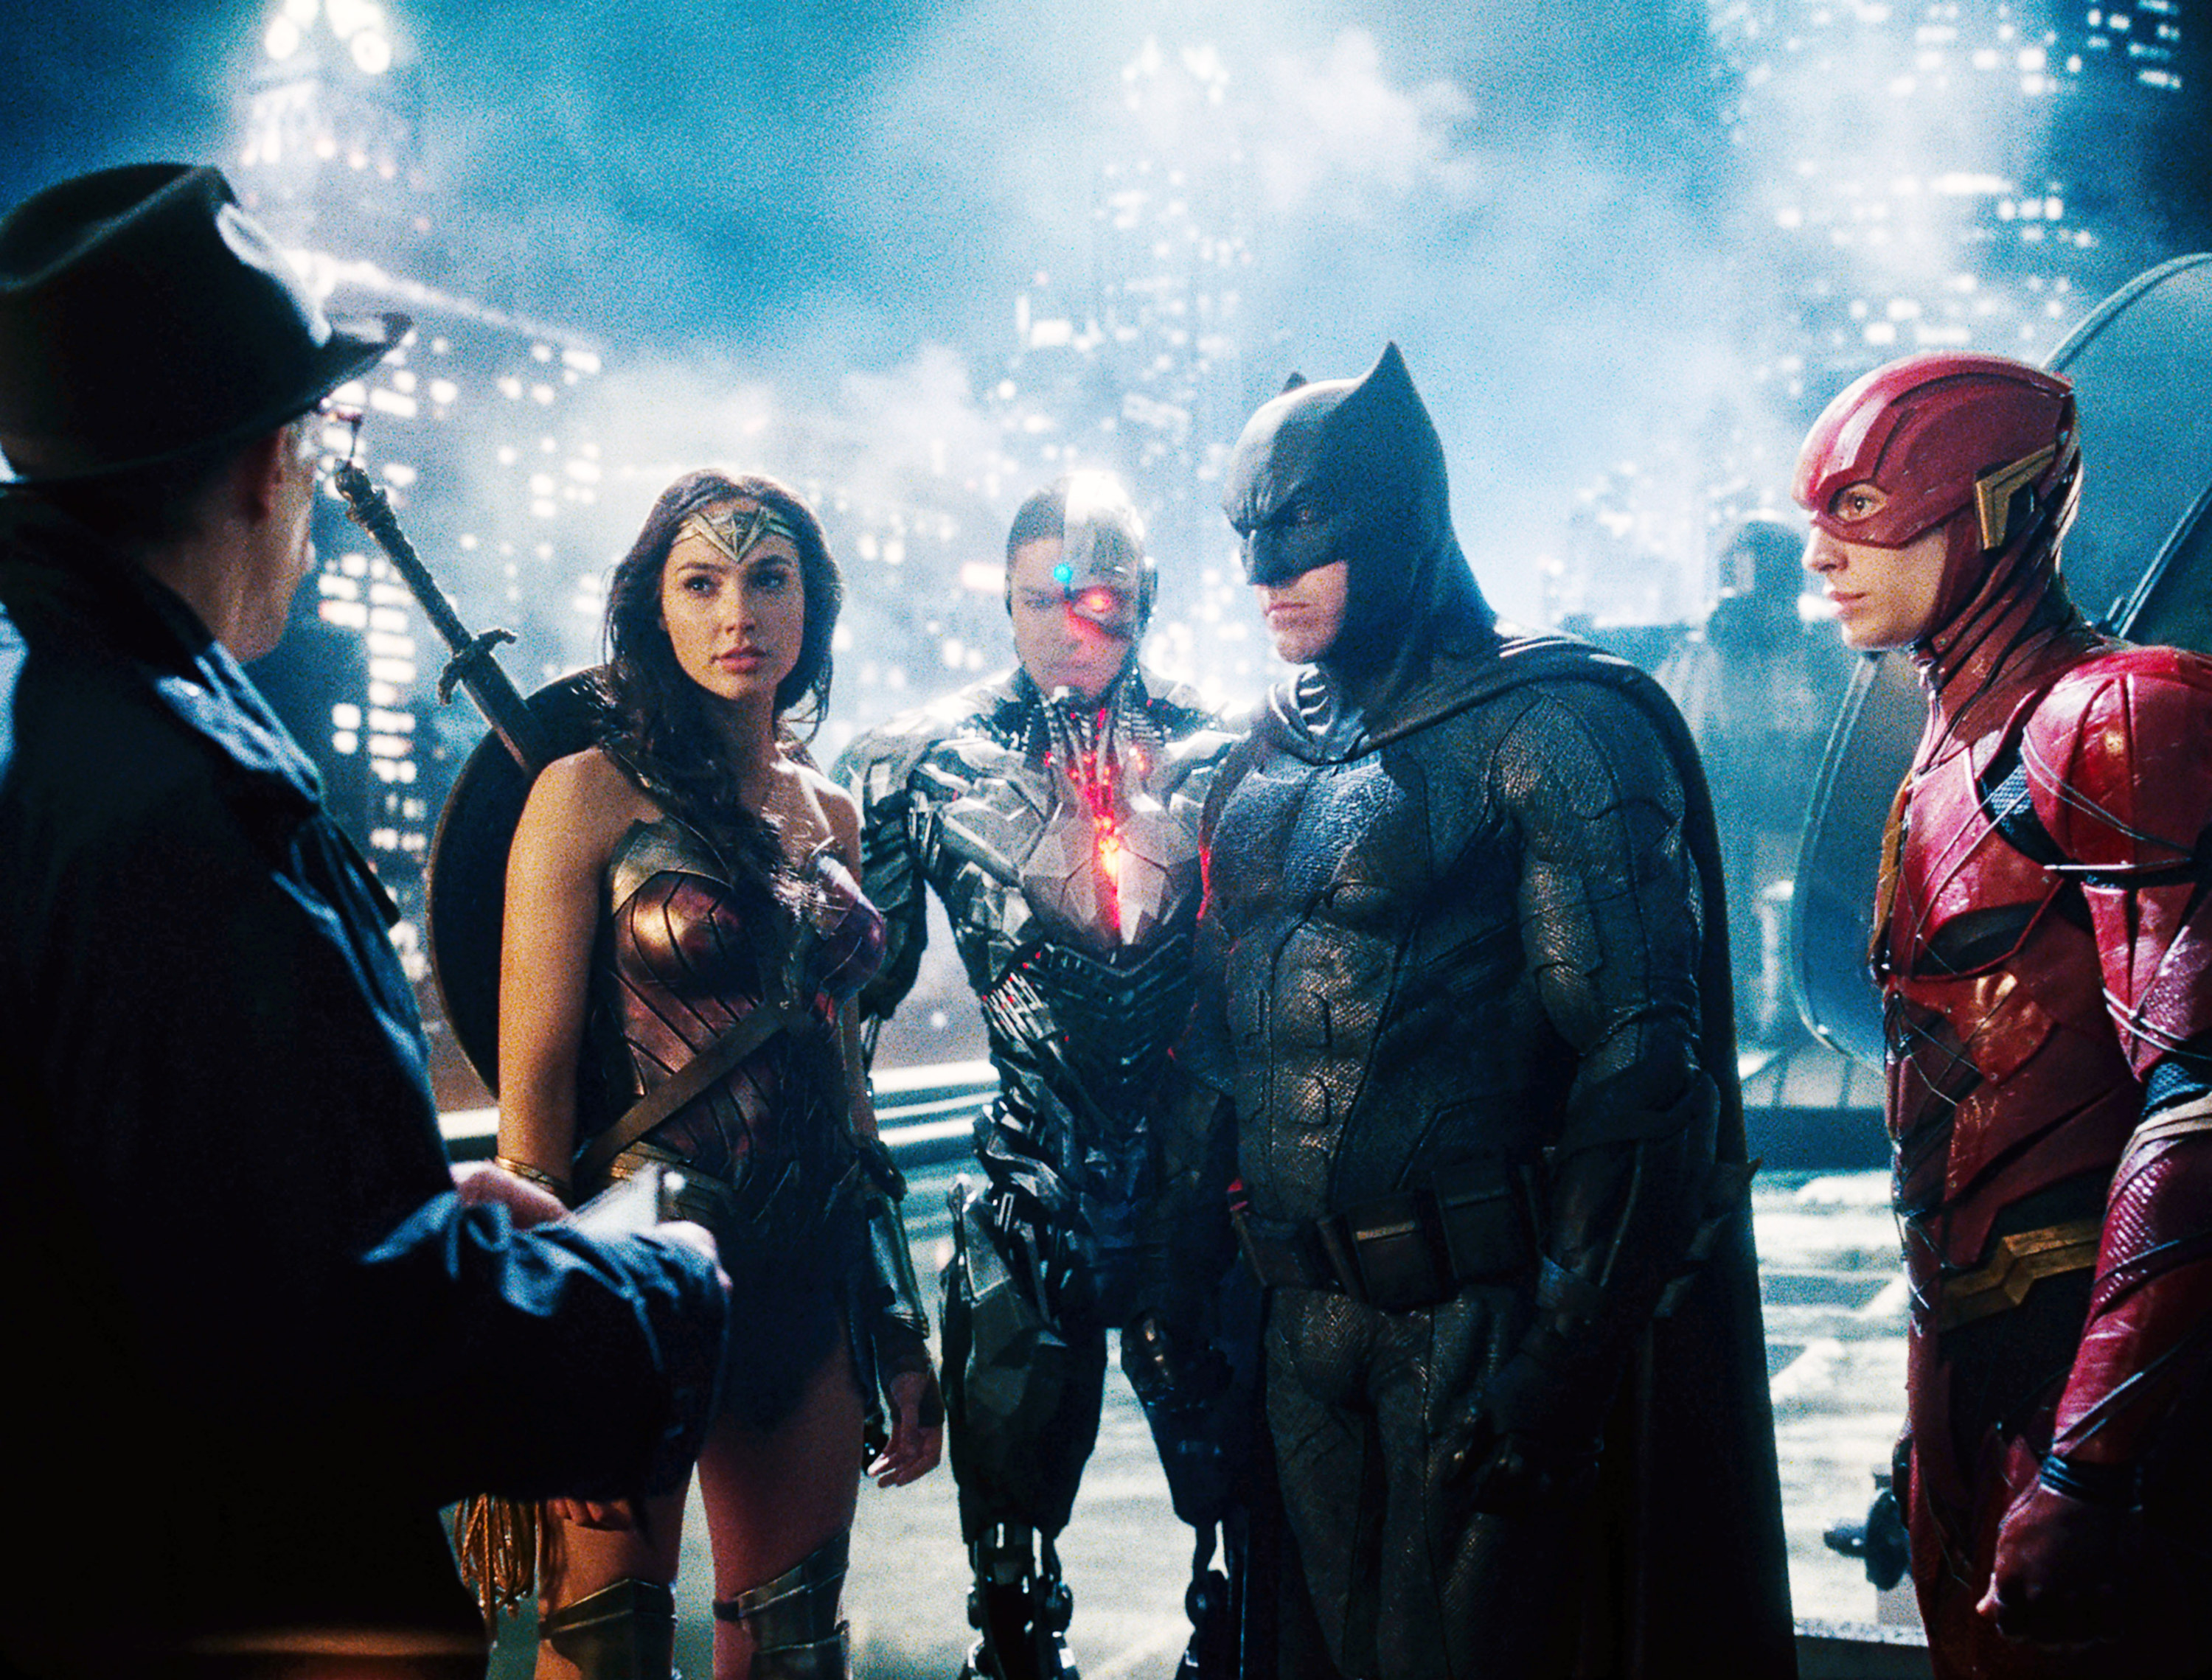 Various superheroes like Wonder Woman and Batman in &quot;Justice League&quot;